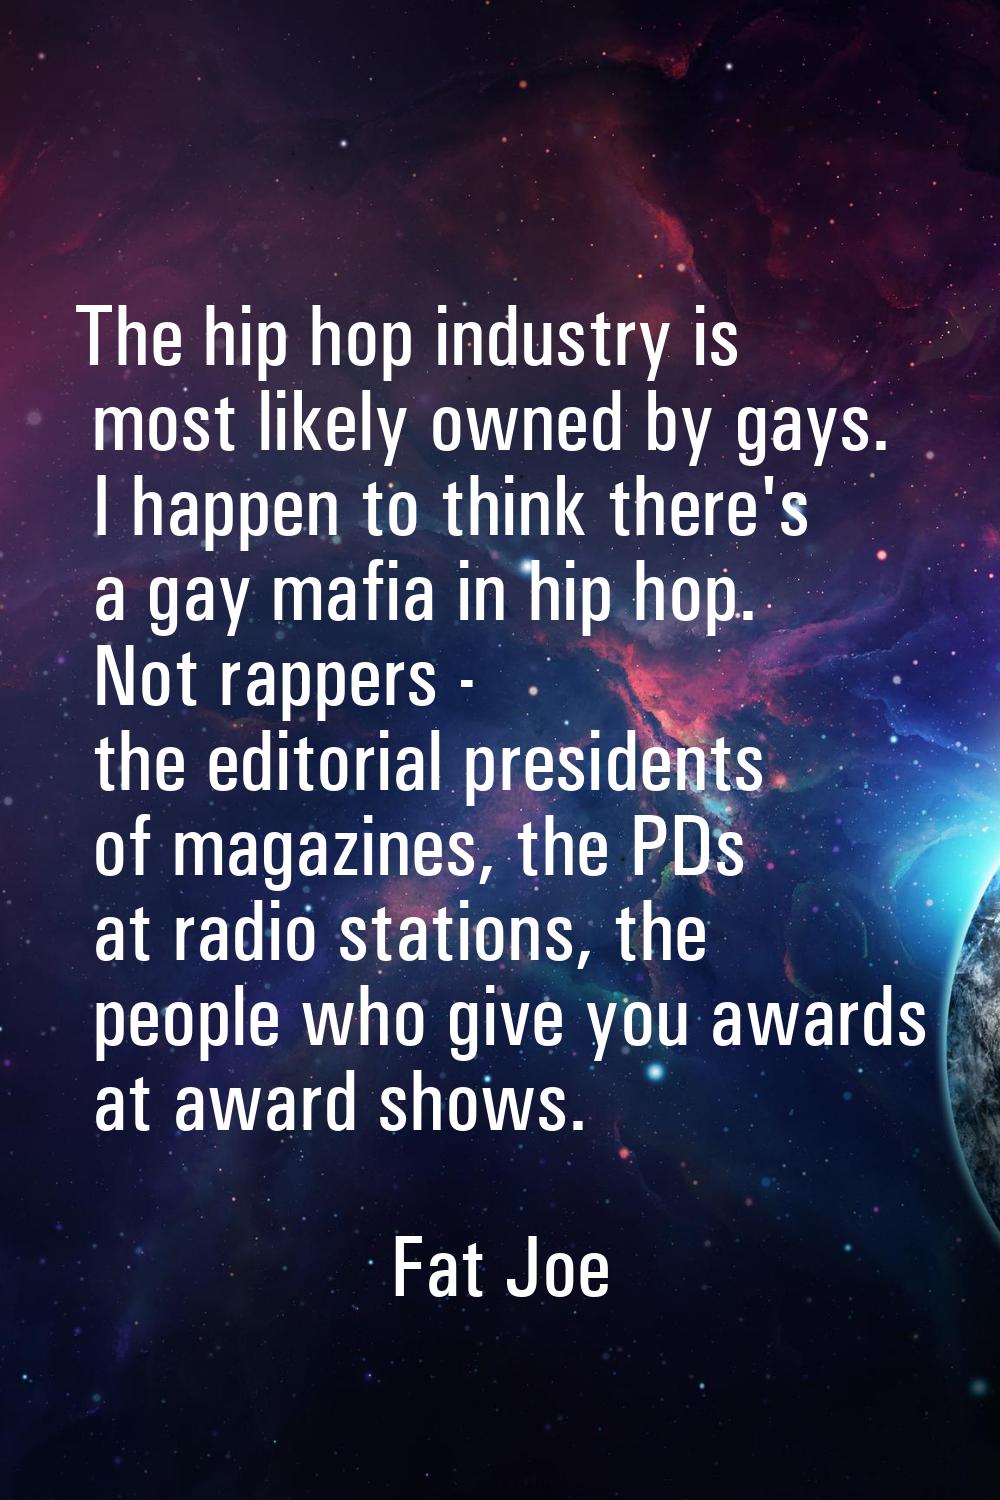 The hip hop industry is most likely owned by gays. I happen to think there's a gay mafia in hip hop